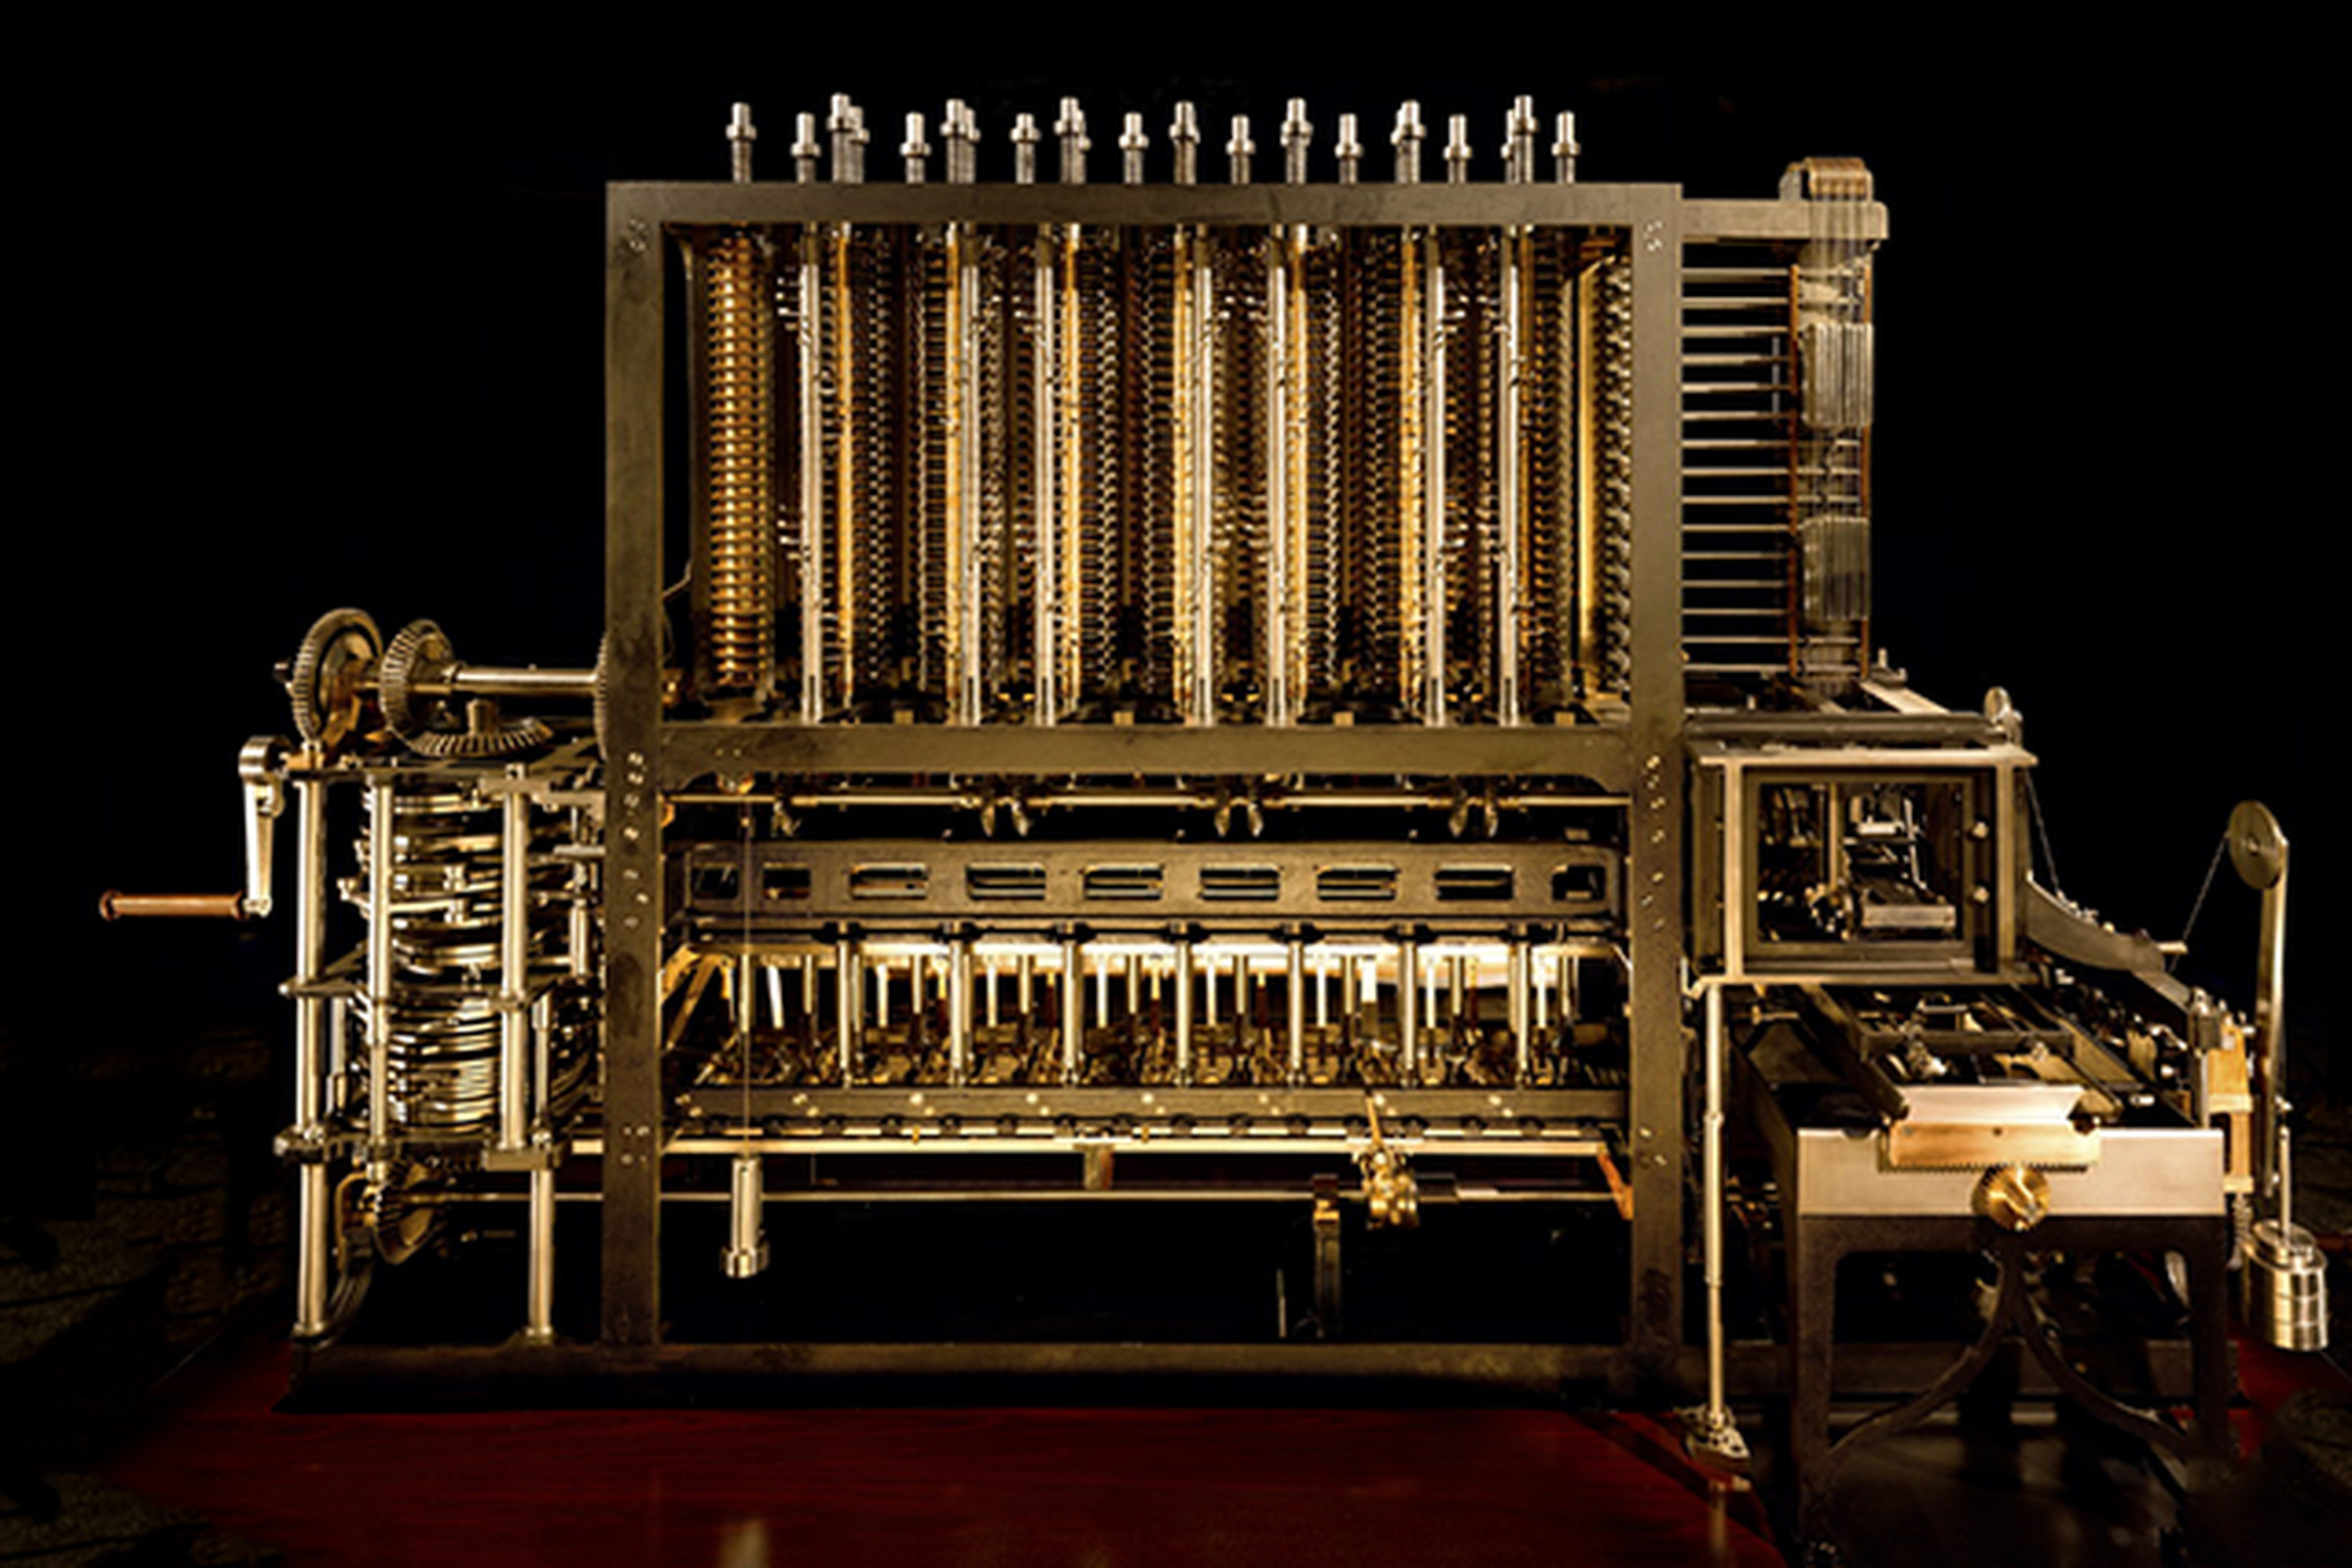 babbage difference engine